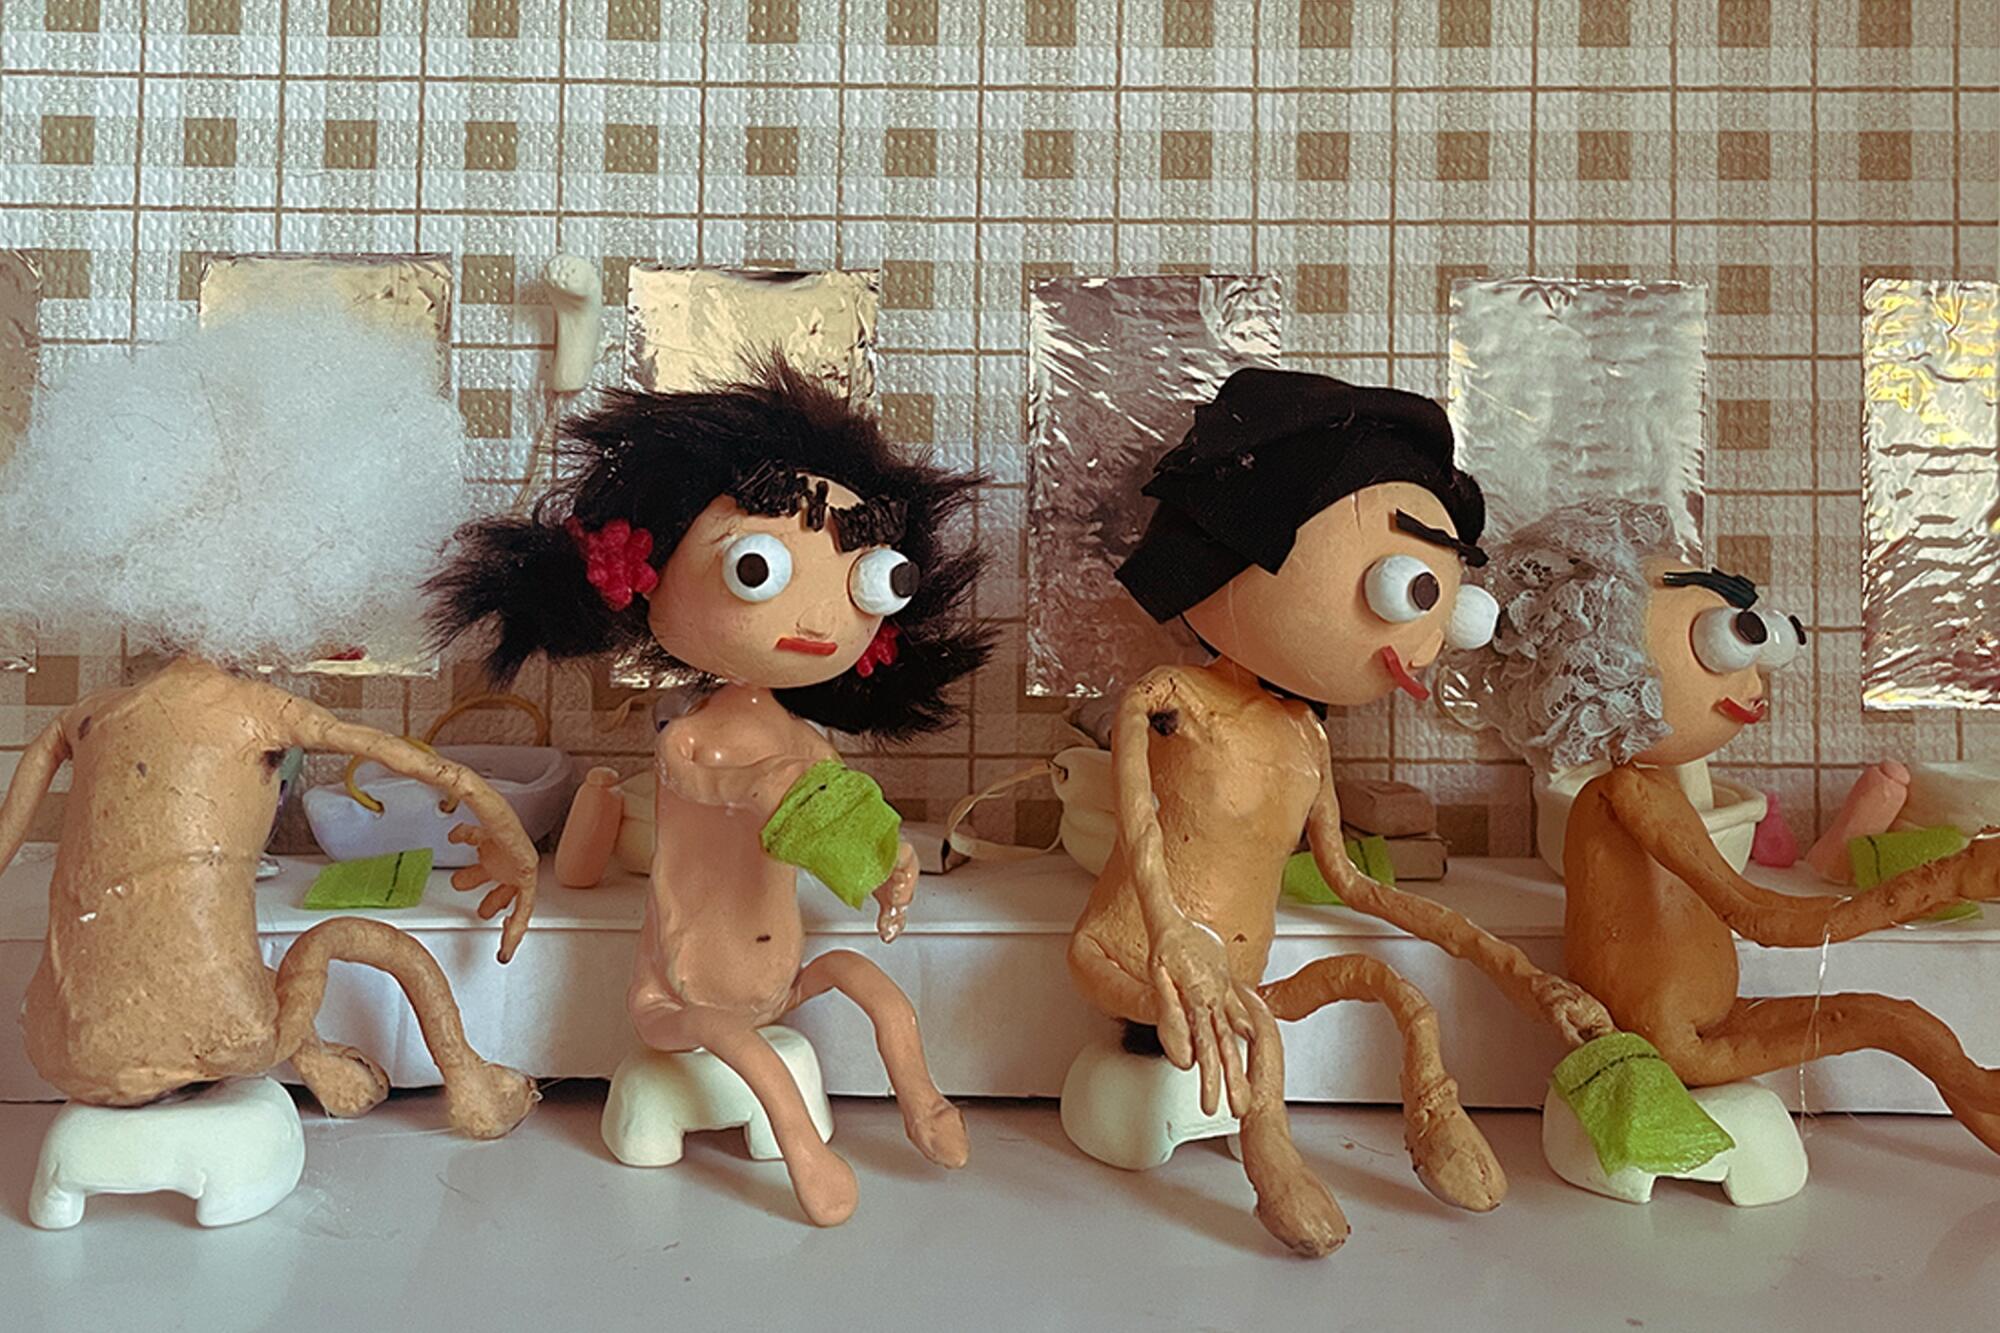 A photo of women puppets of all ages scrubbing their bodies in a spa.